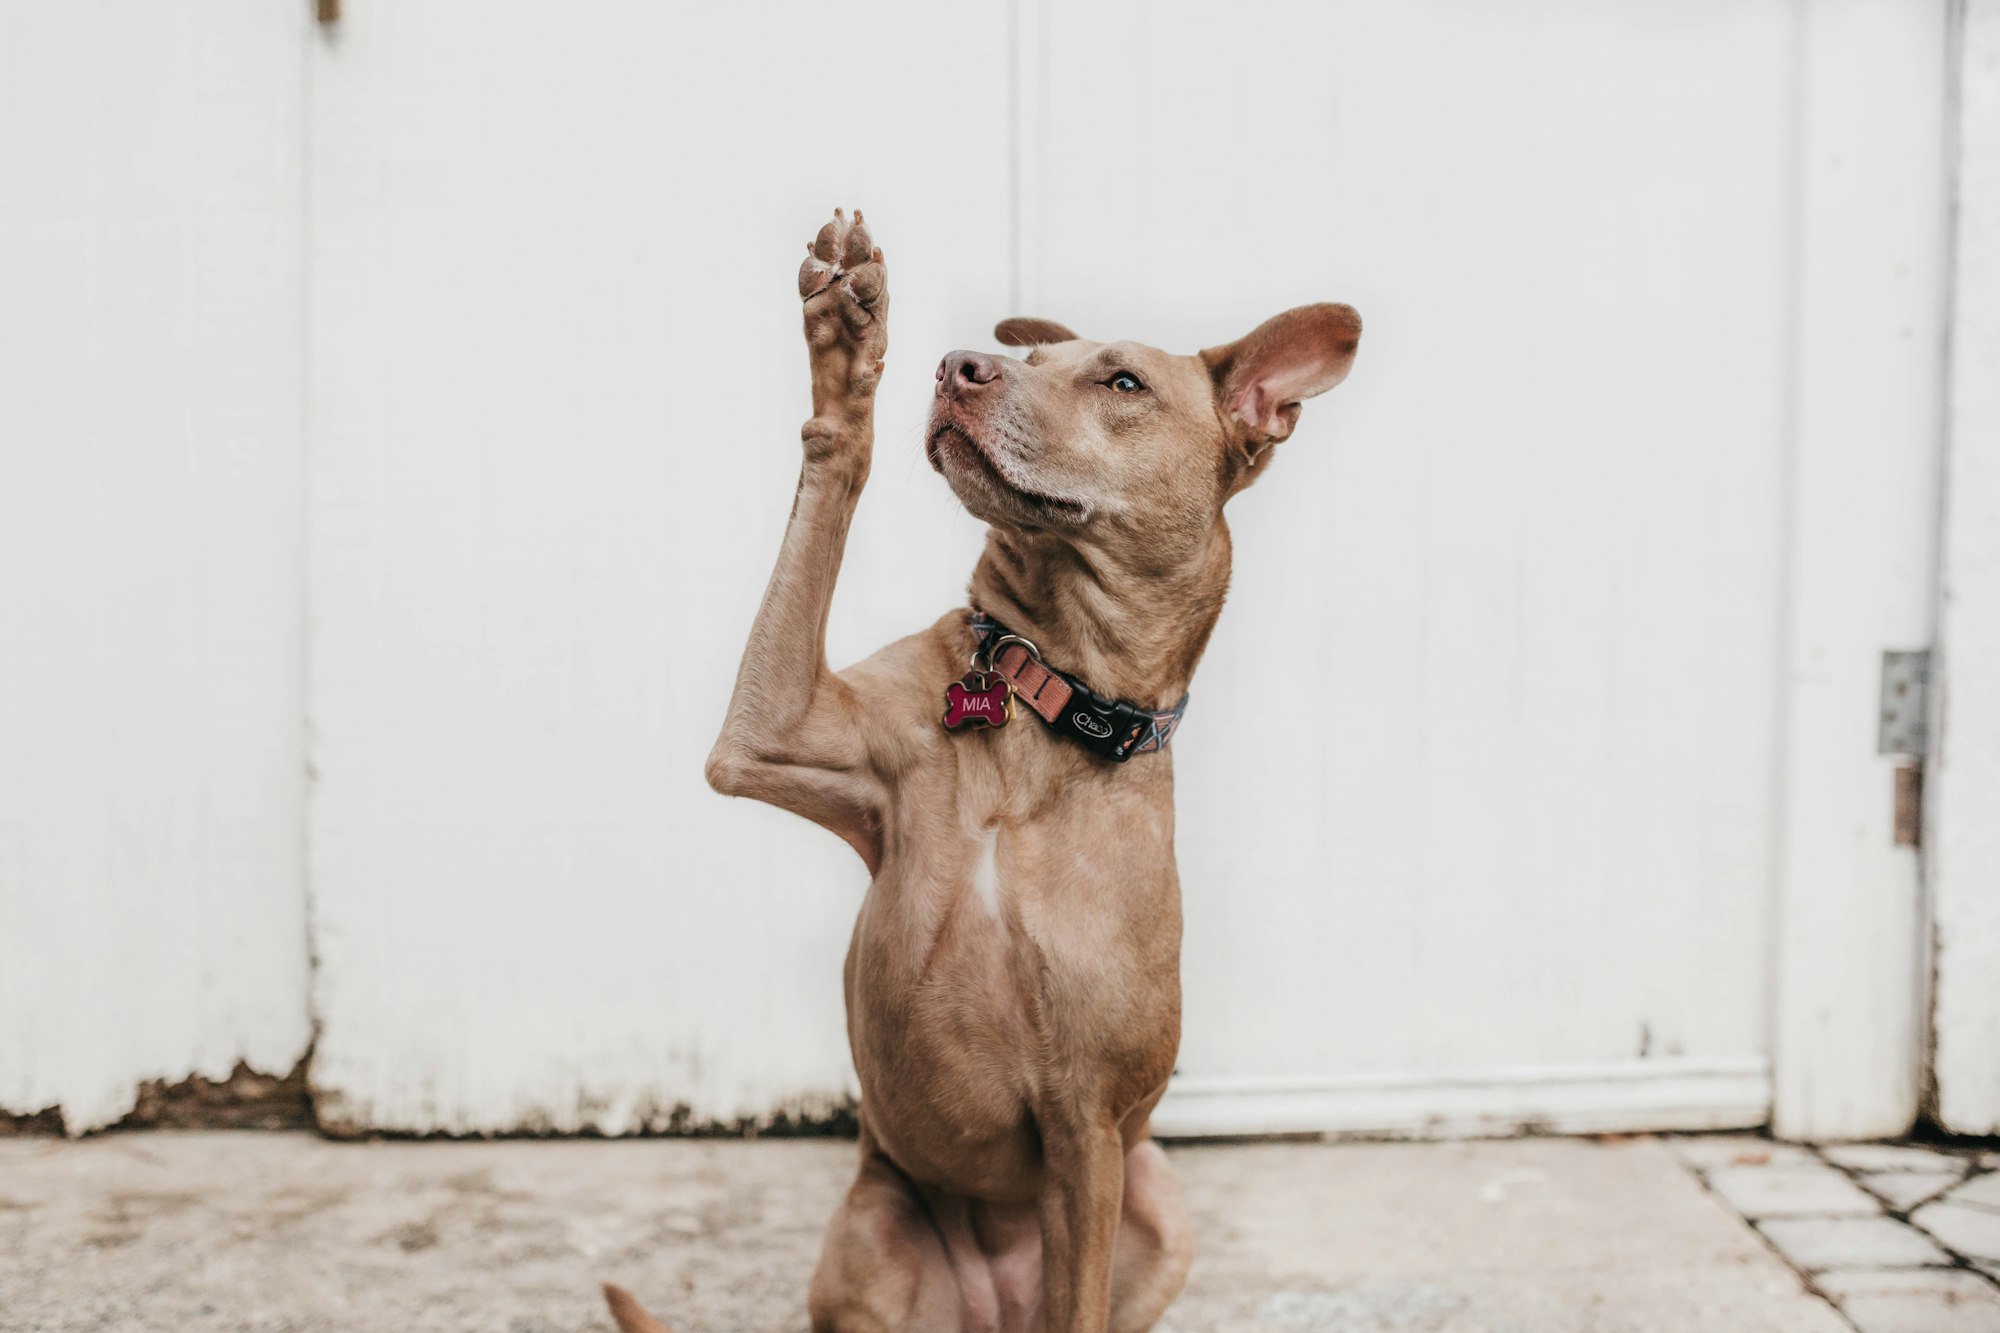 Why do Dogs Give You Their Paw Without Asking? Learn The Truth